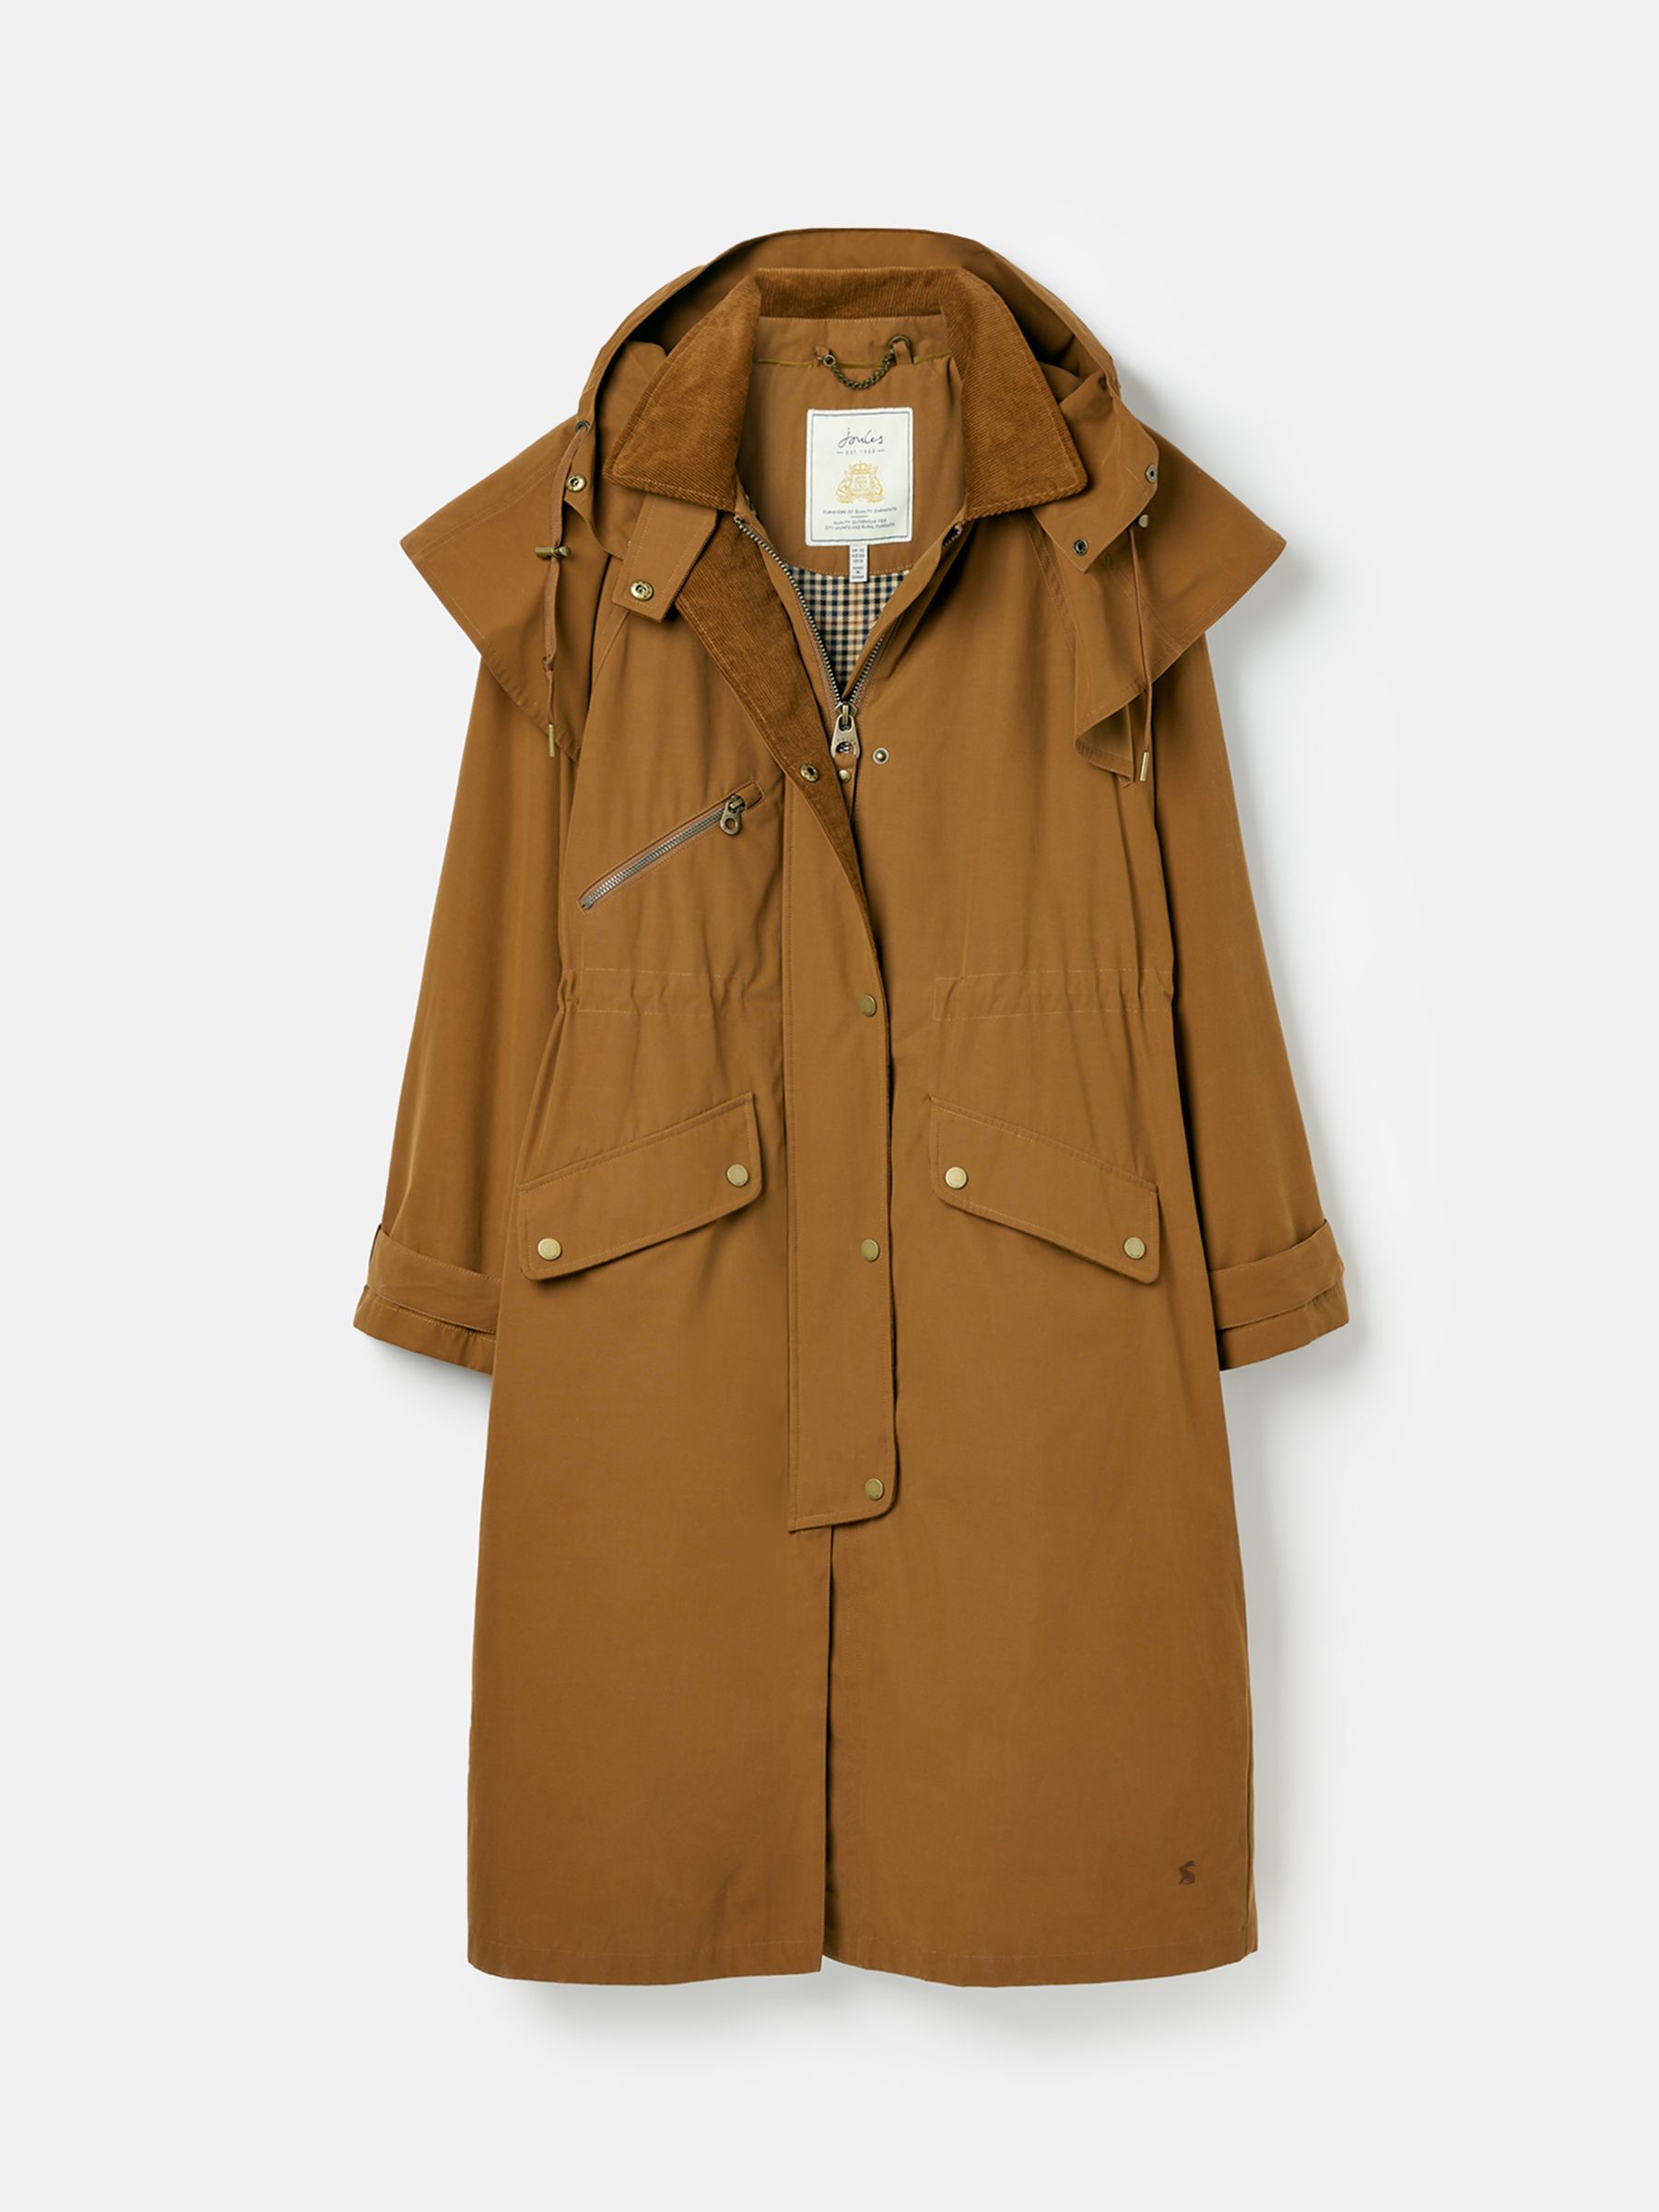 Buy Canter Rust Brown Shower Resistant Long Wax Jacket from the Joules ...